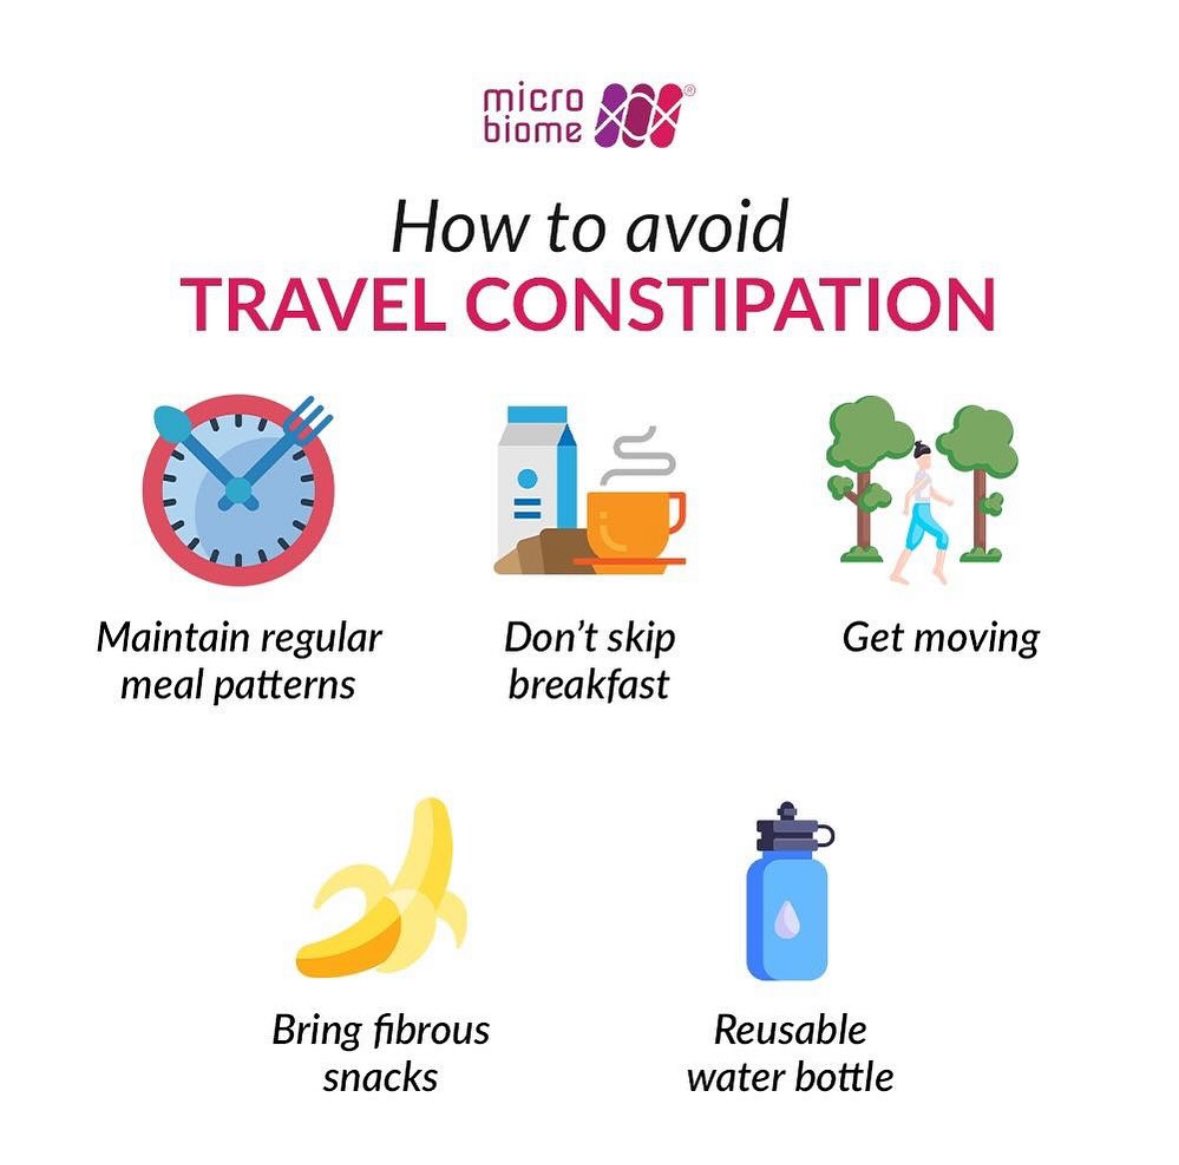 Summer is a time to travel. But travel brings with it bouts of constipation as well. Here is what you can do to avoid travel related constipation. 

#constipation #constipated #travelconstipation #travelgram #guthealth #gut #guthealthmatters #gutmicrobiome #microbiomeresearch